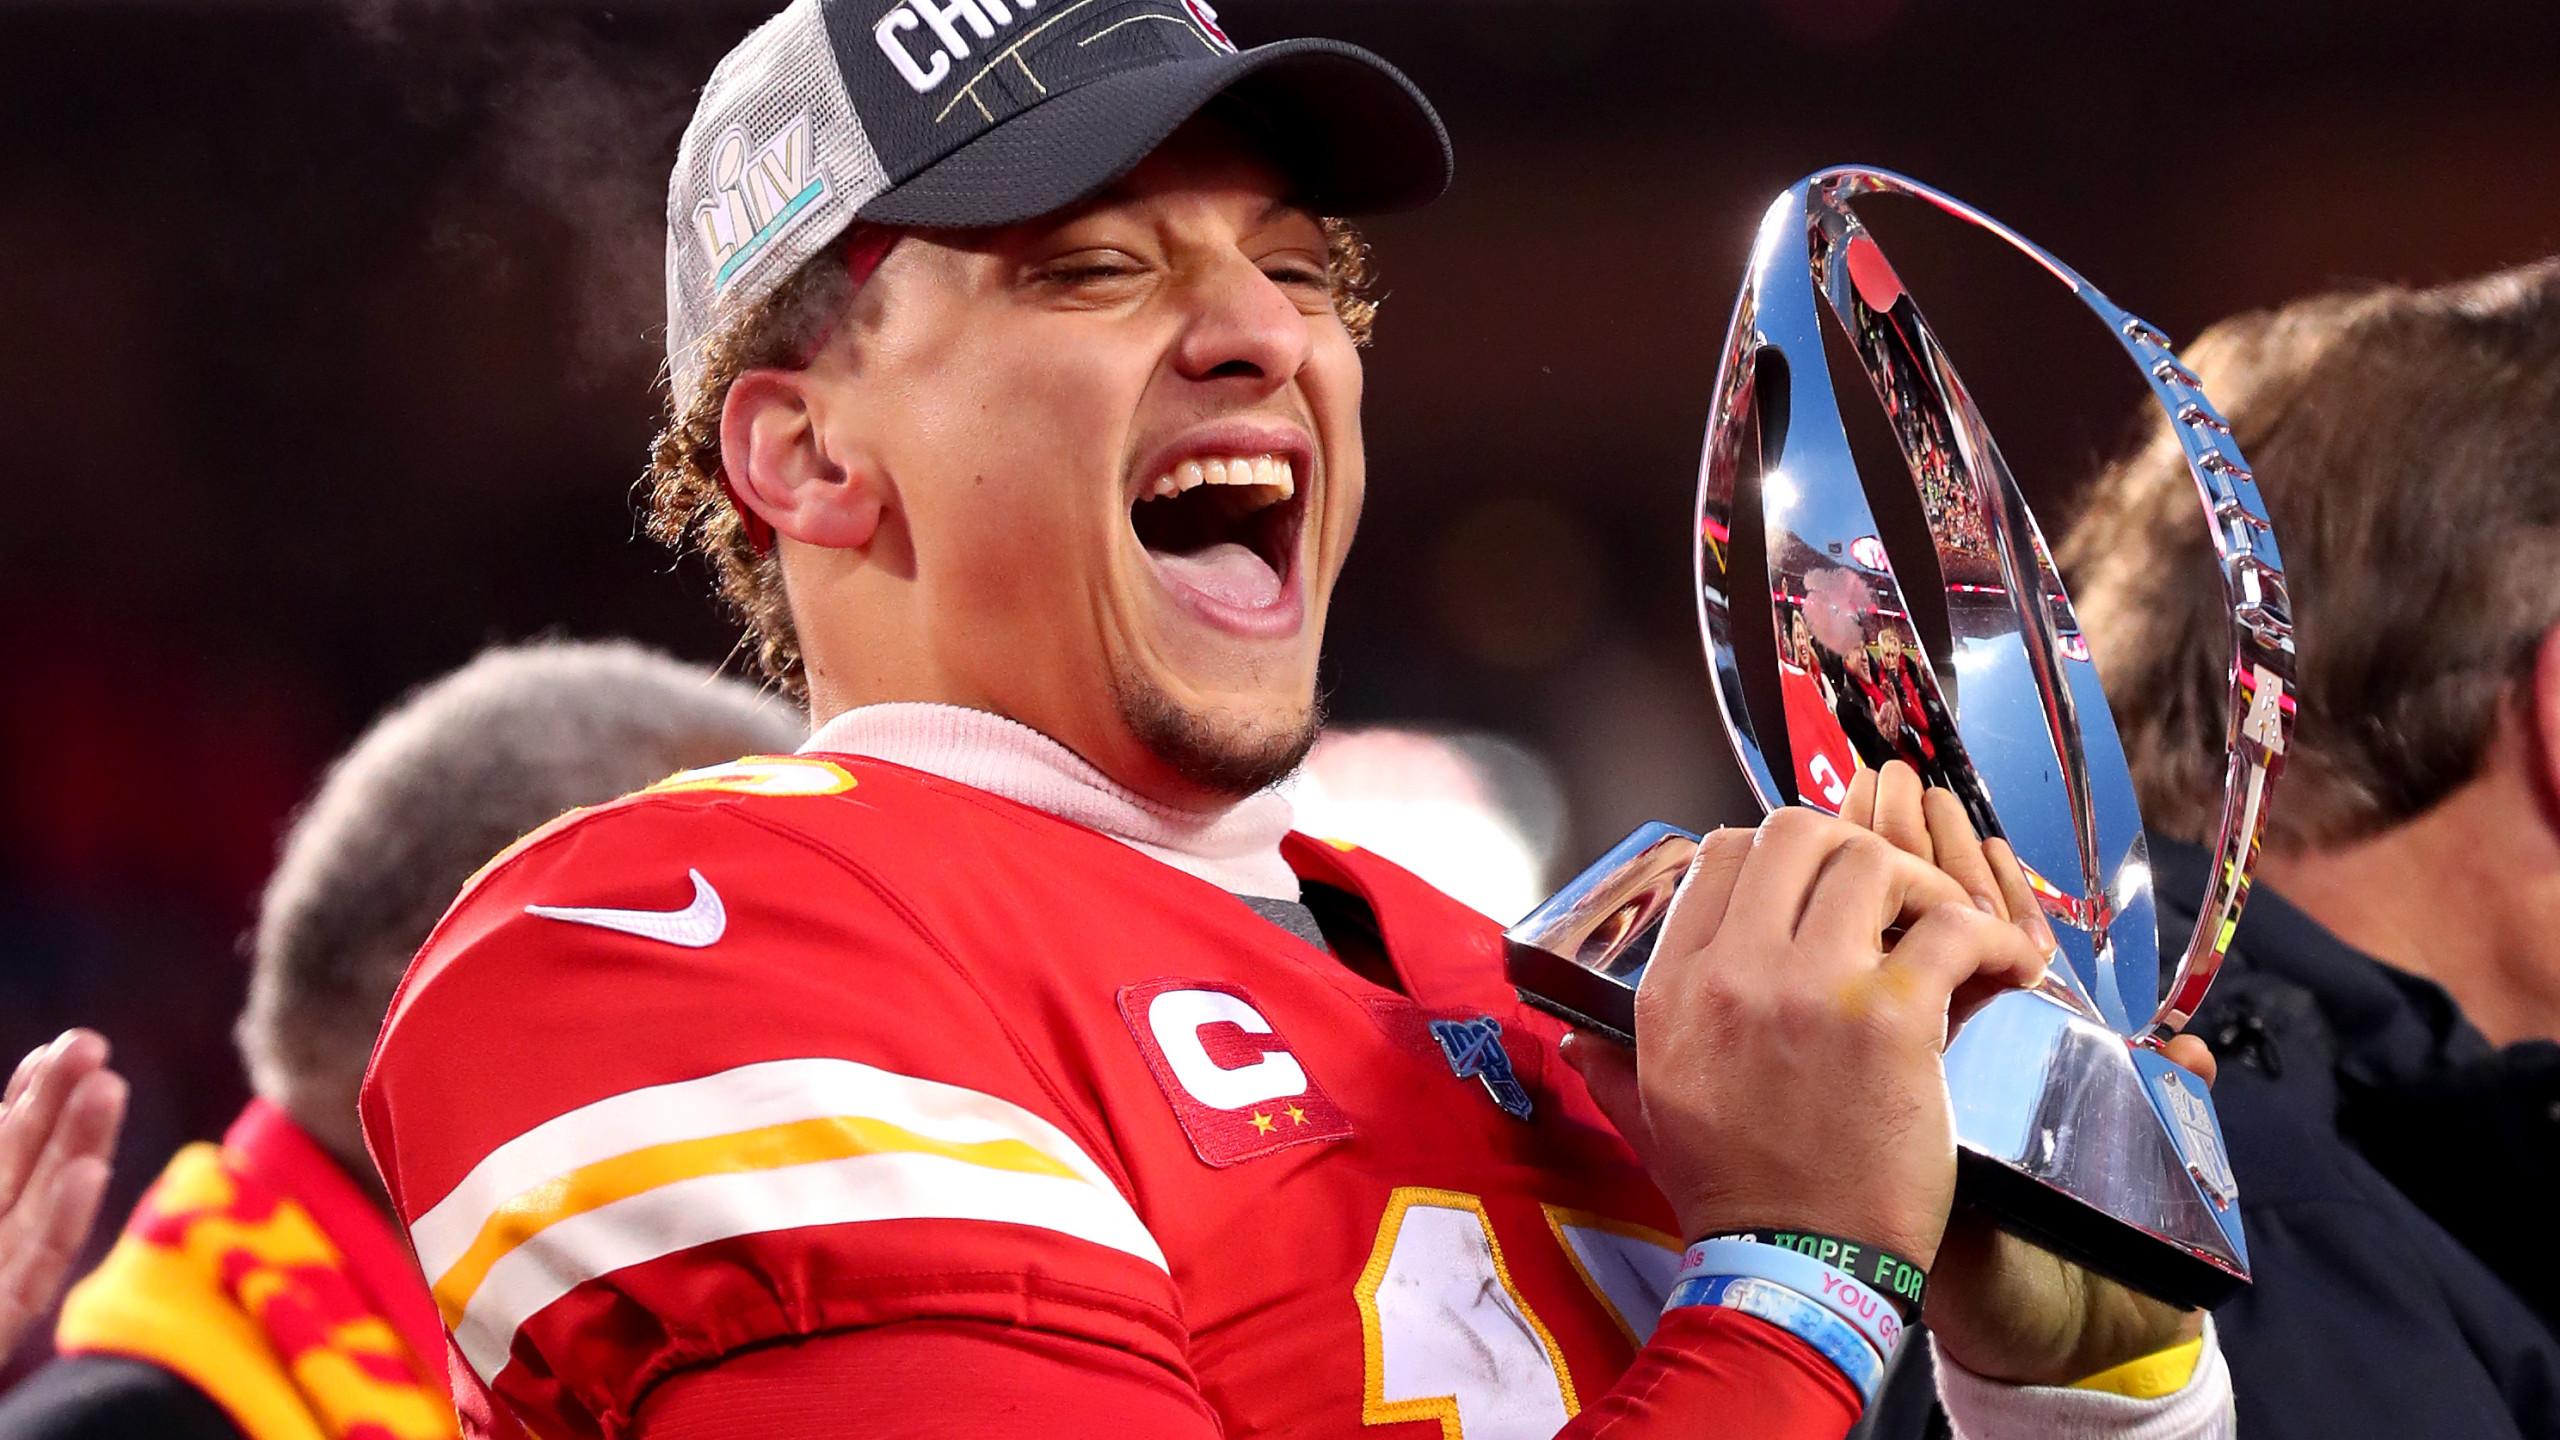 Kansas City Chiefs advance to their first Super Bowl in 50 years